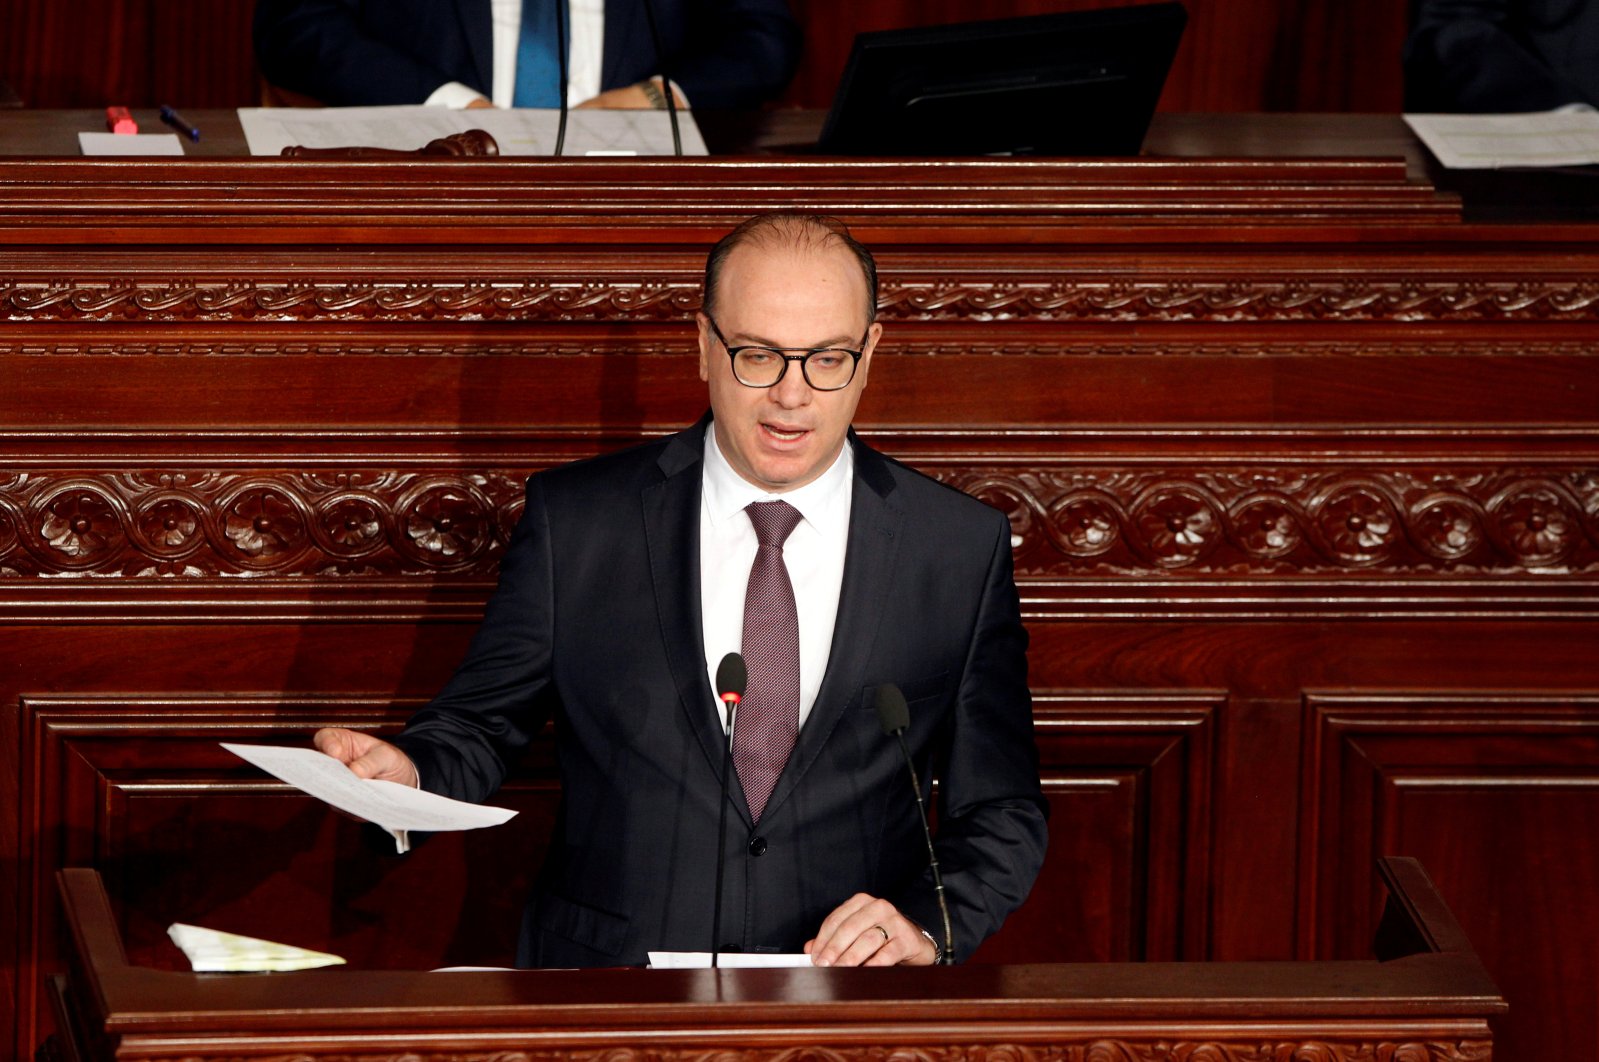 Tunisia's Prime Minister Elyes Fakhfakh speaks at the Assembly of People's Representatives, Tunis, Feb. 26, 2020. (REUTERS Photo)